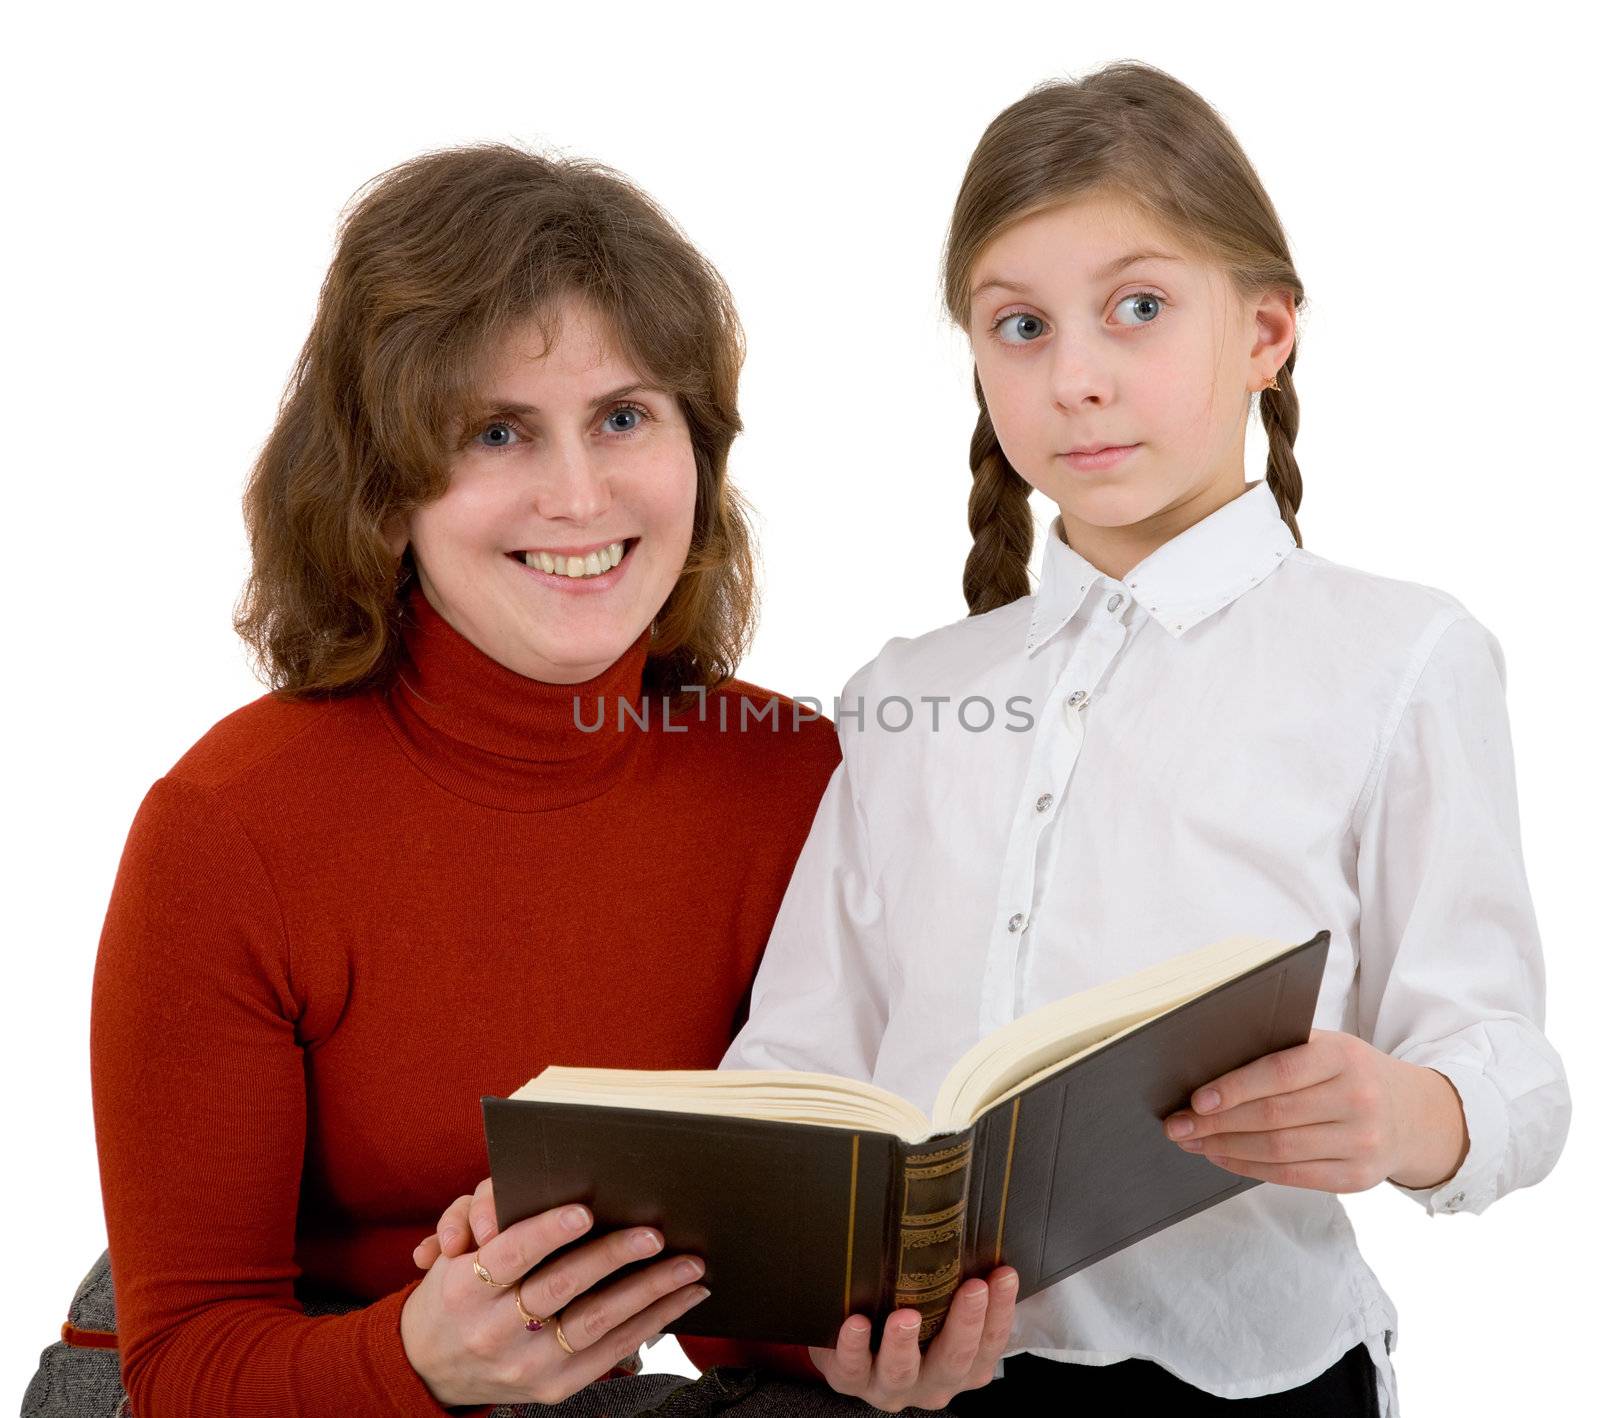 Woman with girl reading book on white 